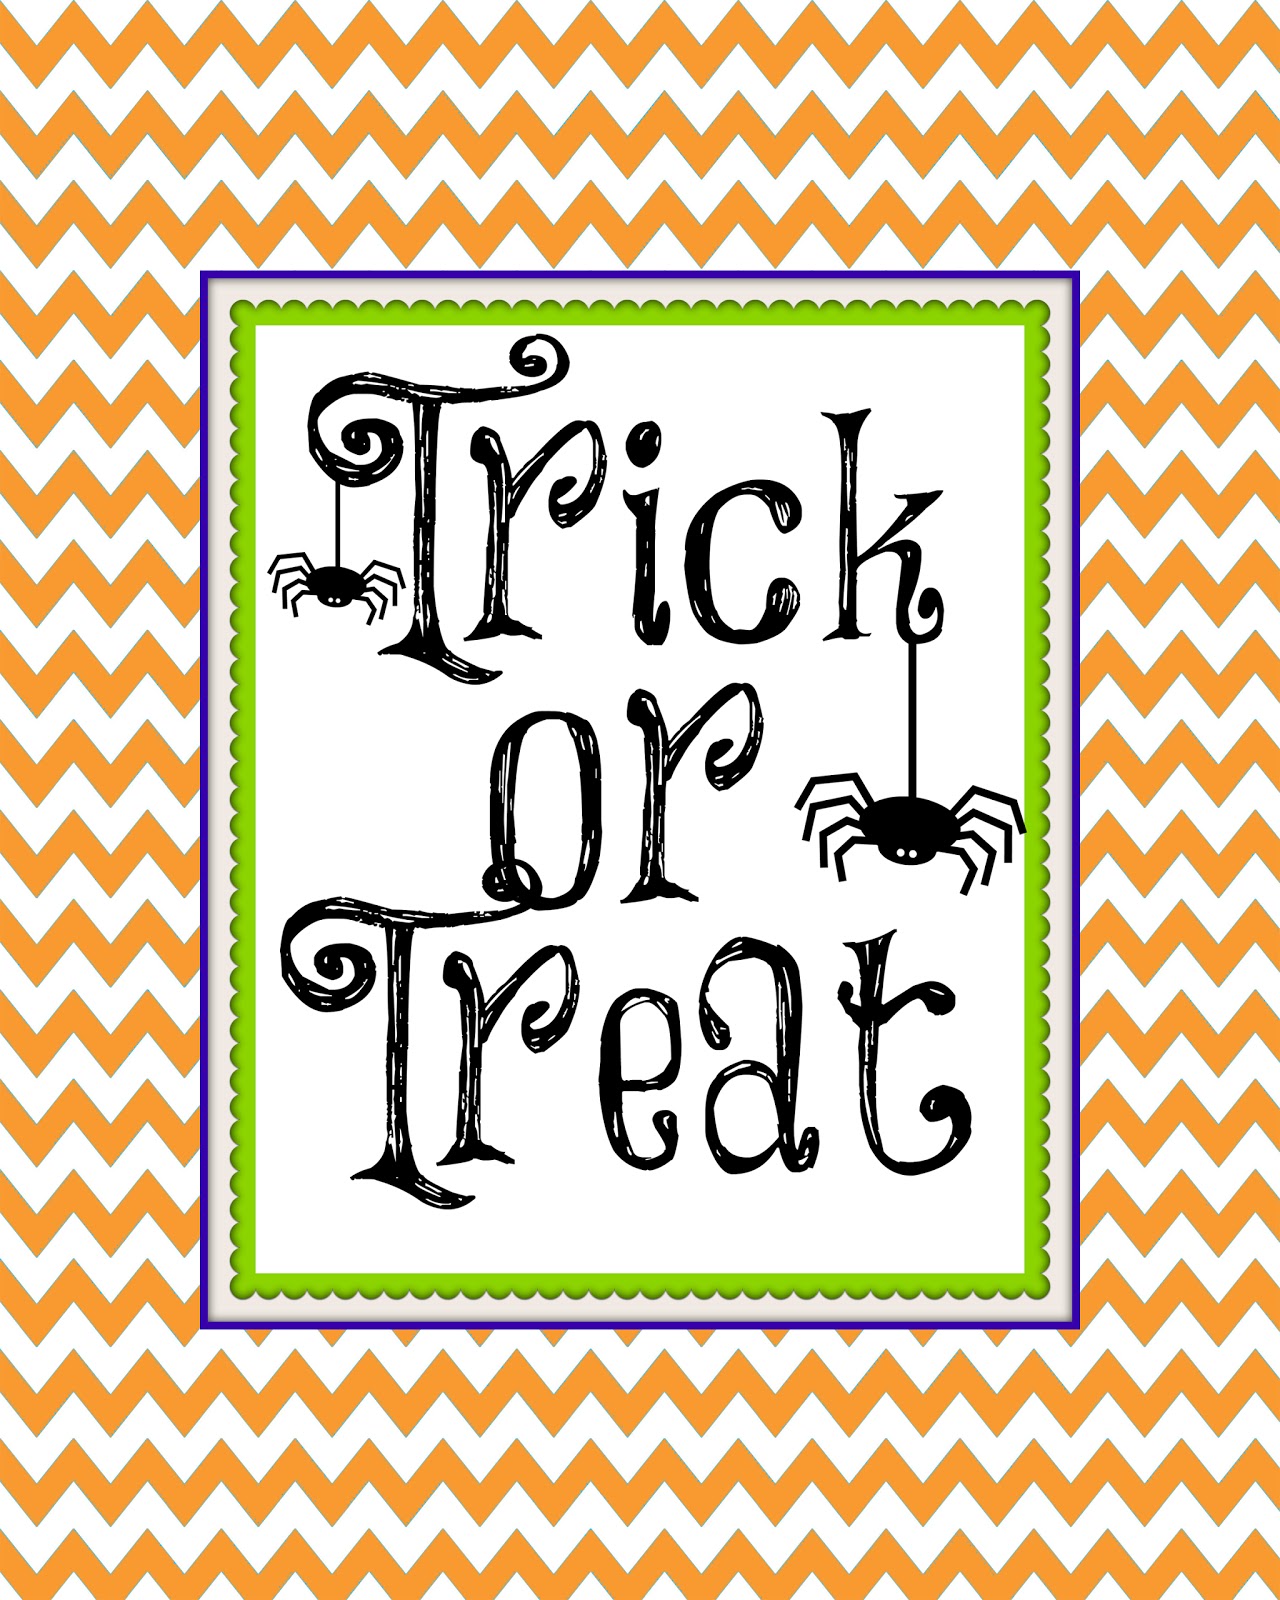 second-chance-to-dream-free-halloween-printable